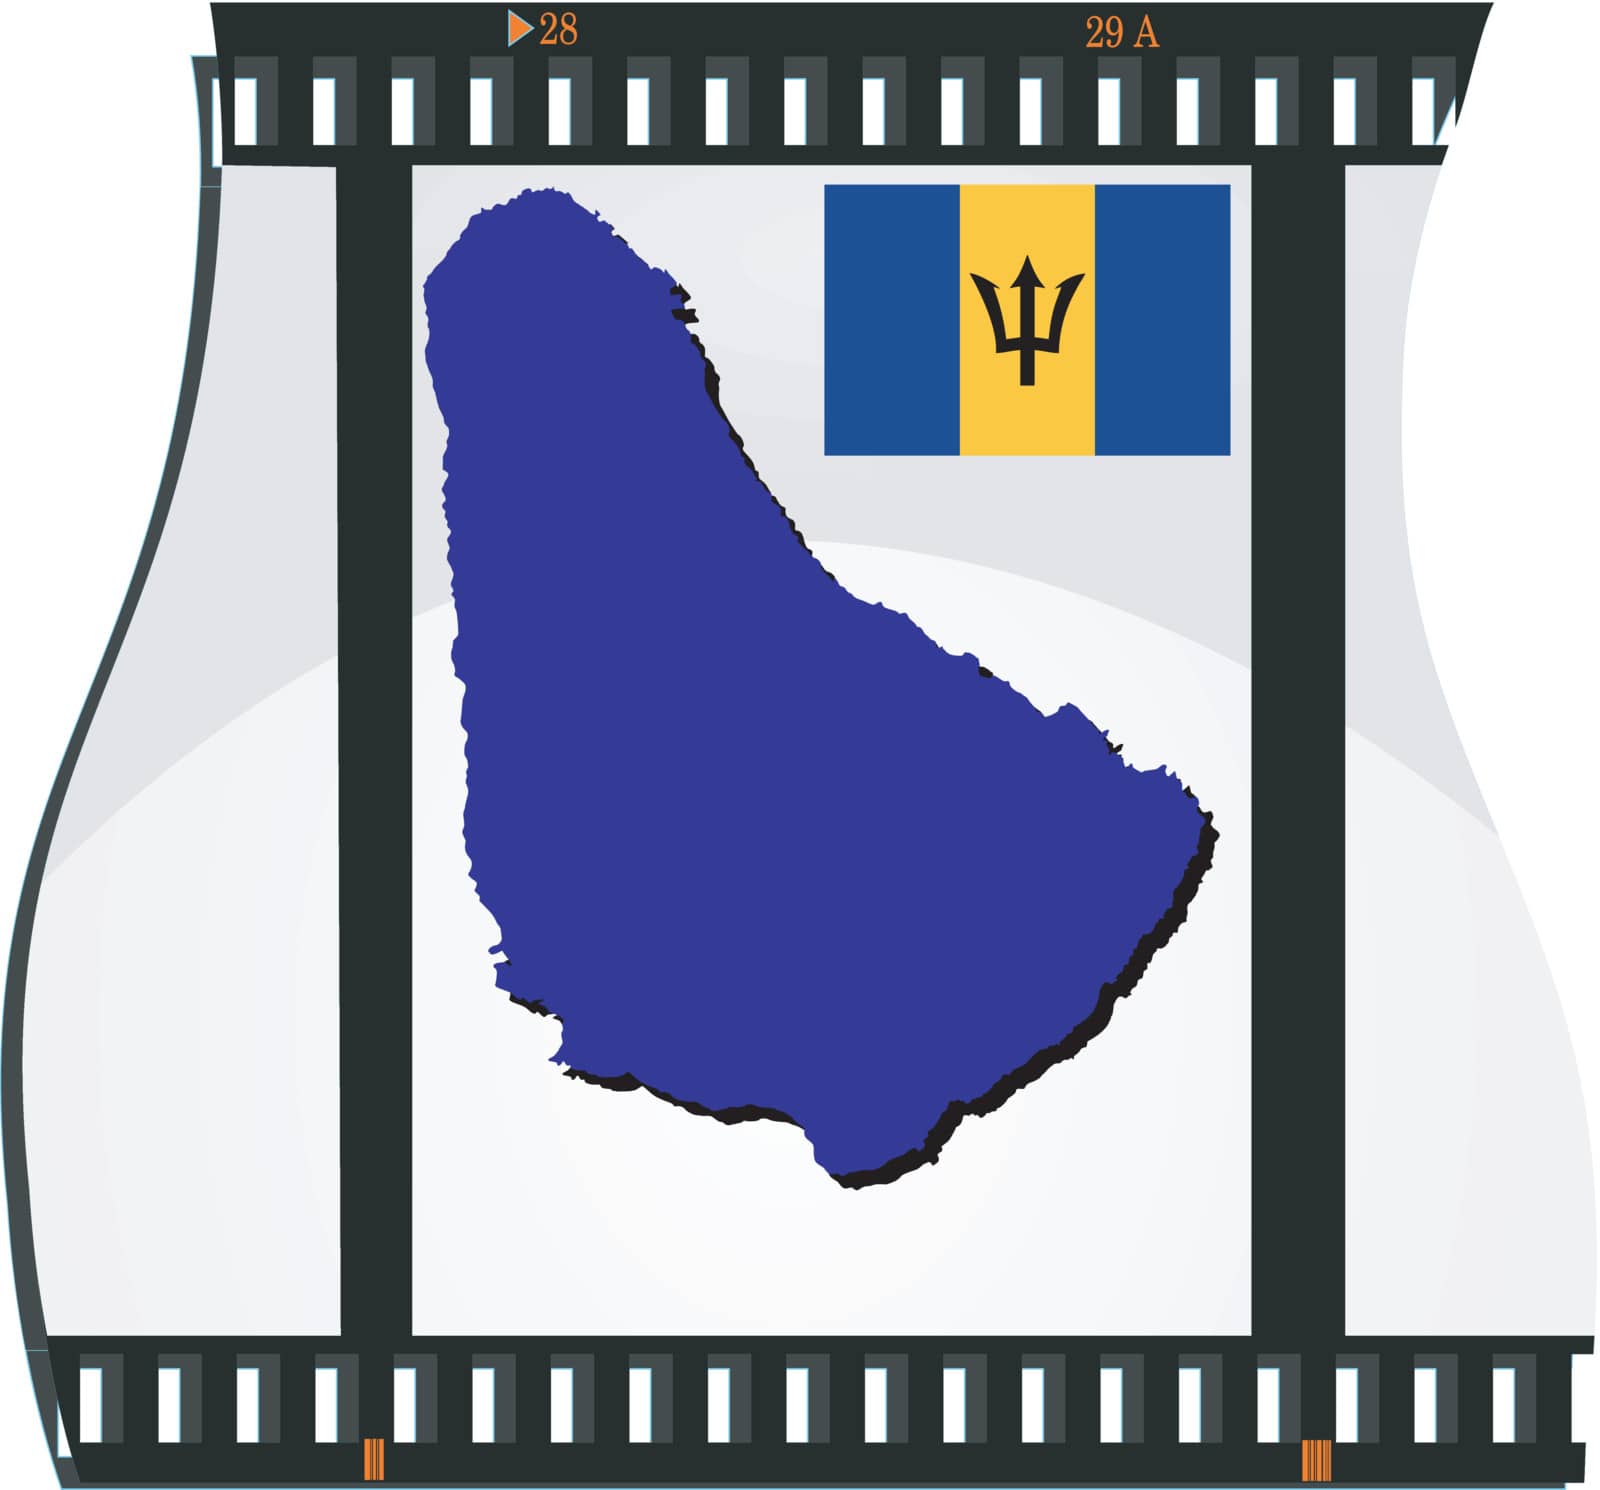 Film shots with a national map of Barbados